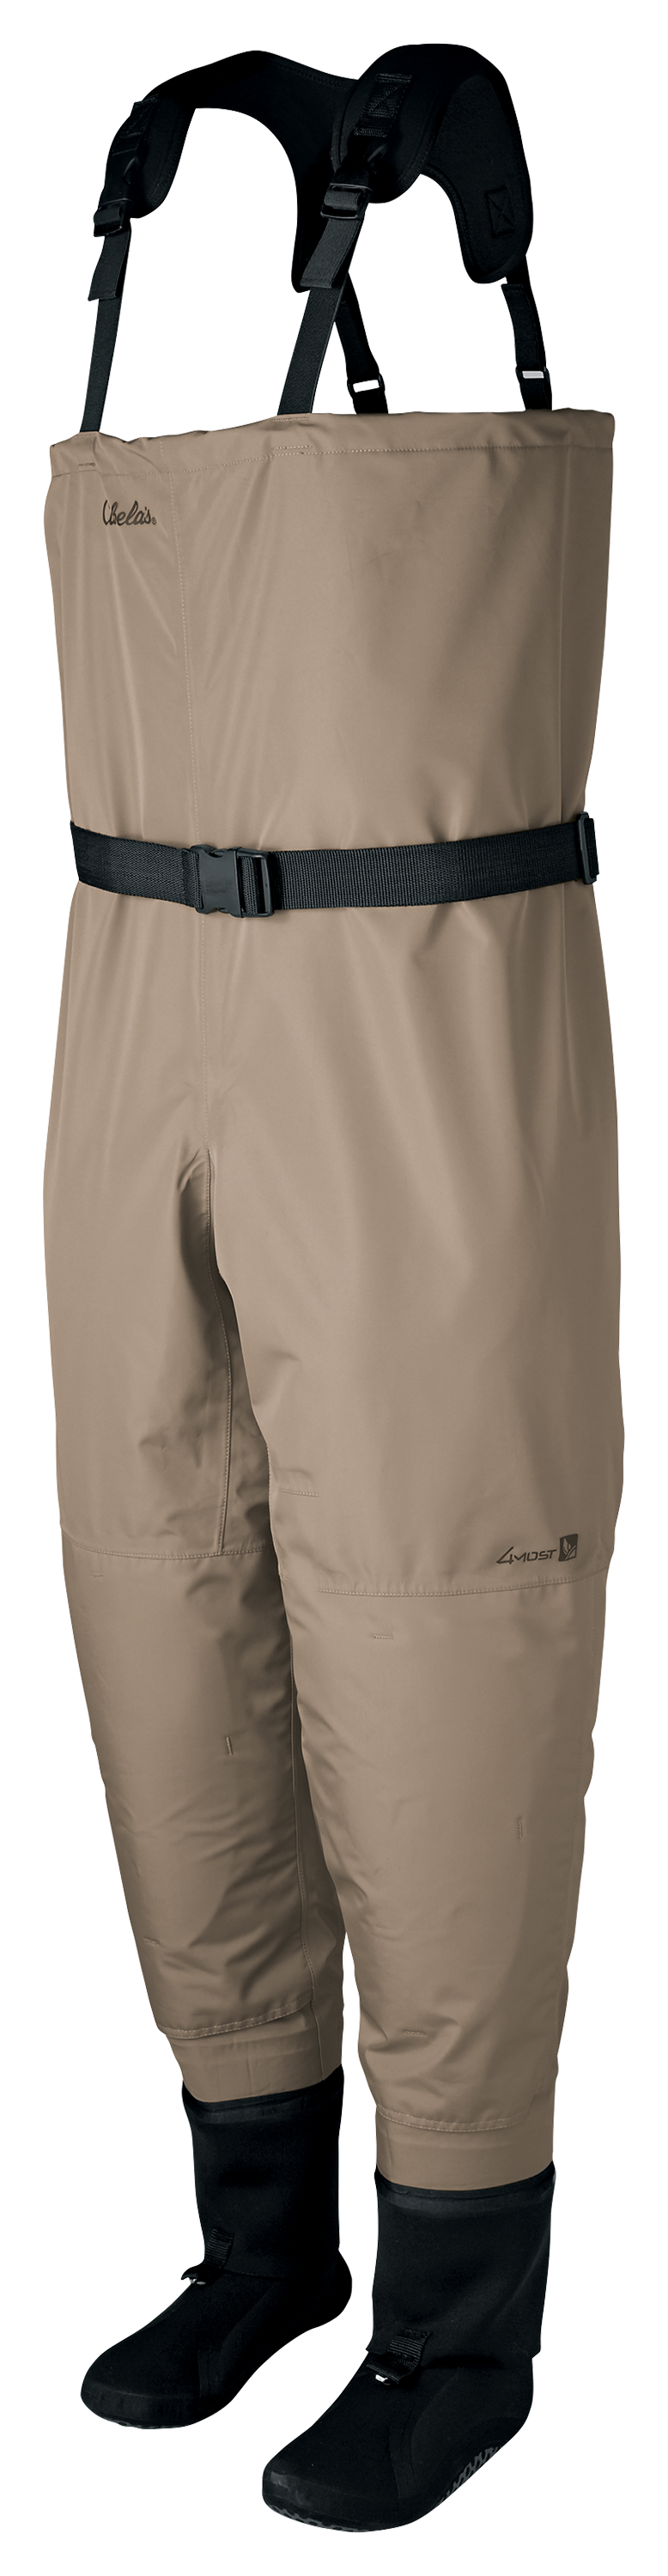 Cabela's® Premium Breathable Stockingfoot Waders with 4MOST DRY